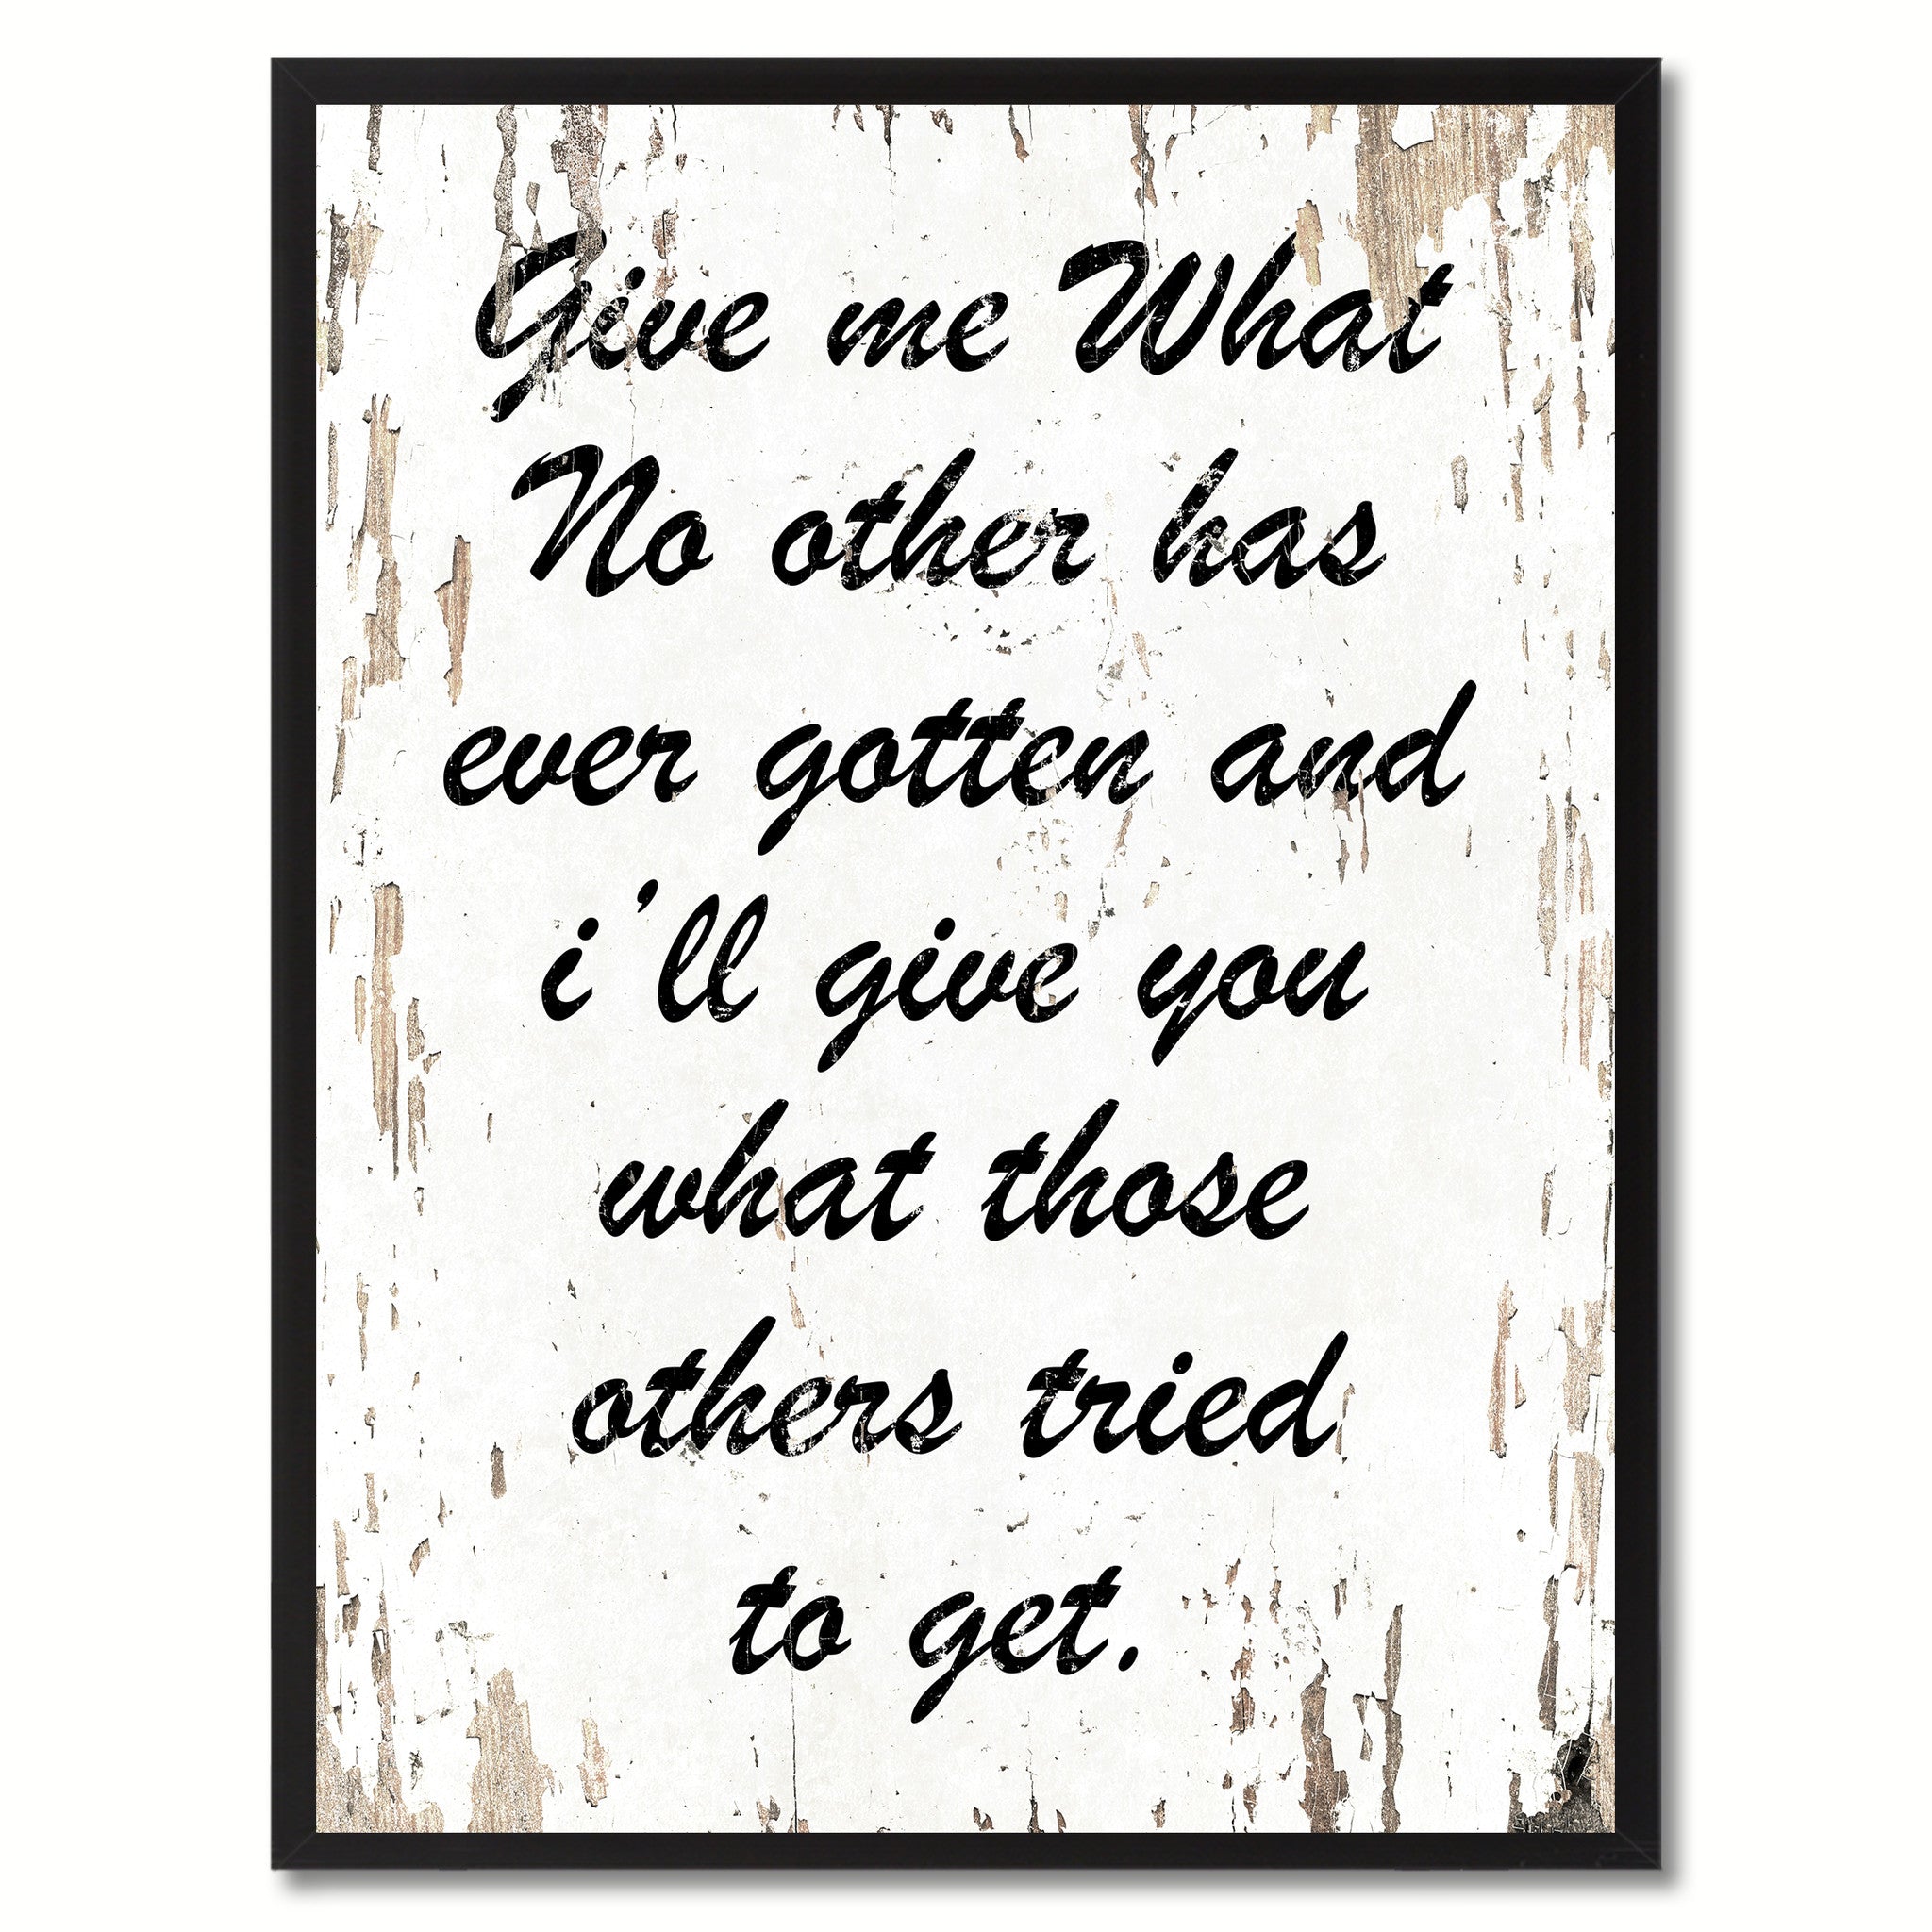 Give me what no other has ever gotten & I'll give you what those others tried to get Inspirational Quote Saying Gift Ideas Home Decor Wall Art